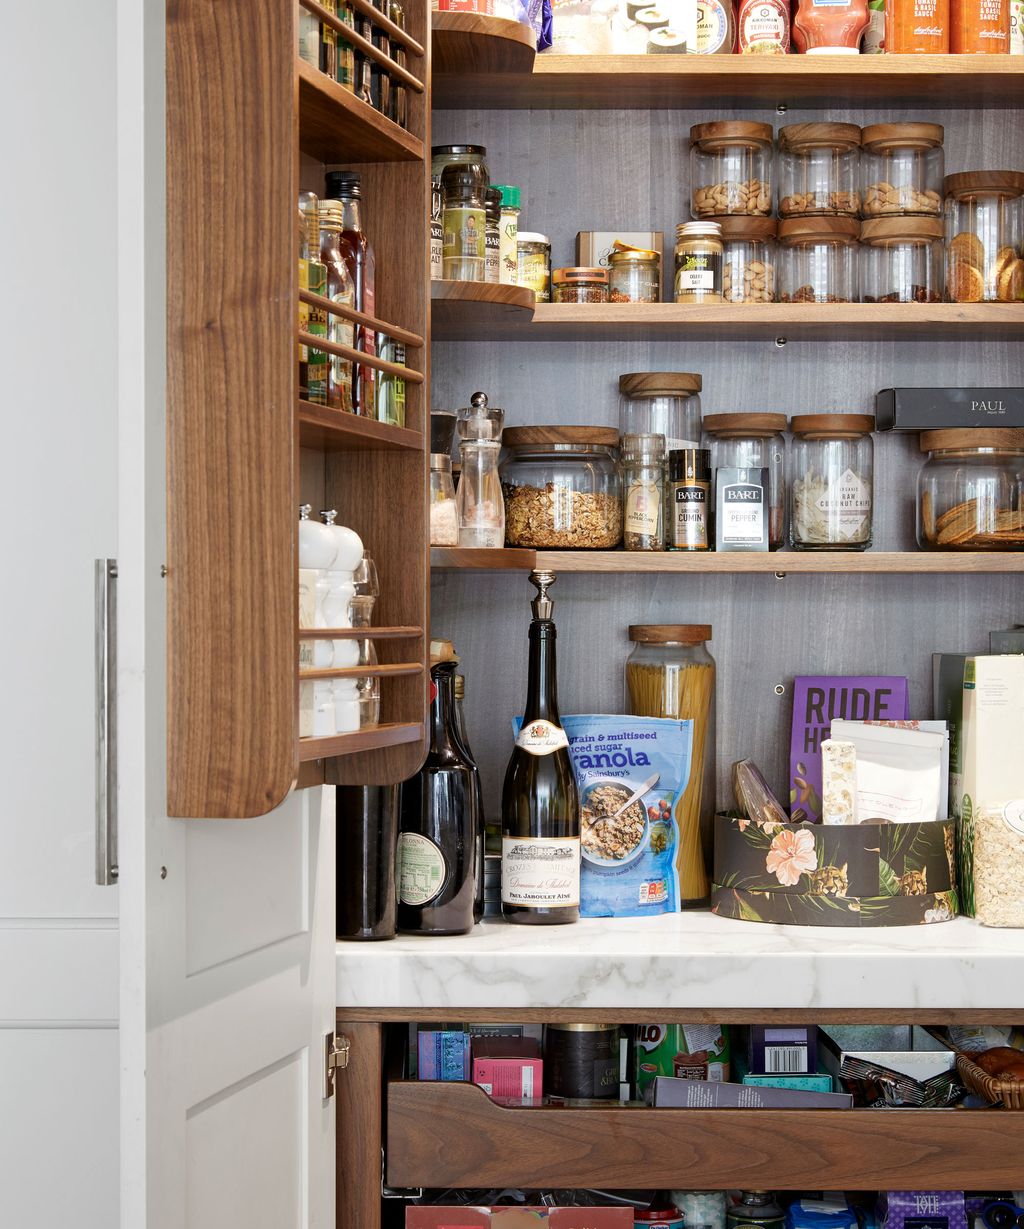 Kitchen decluttering checklist: 10 things to get rid of now